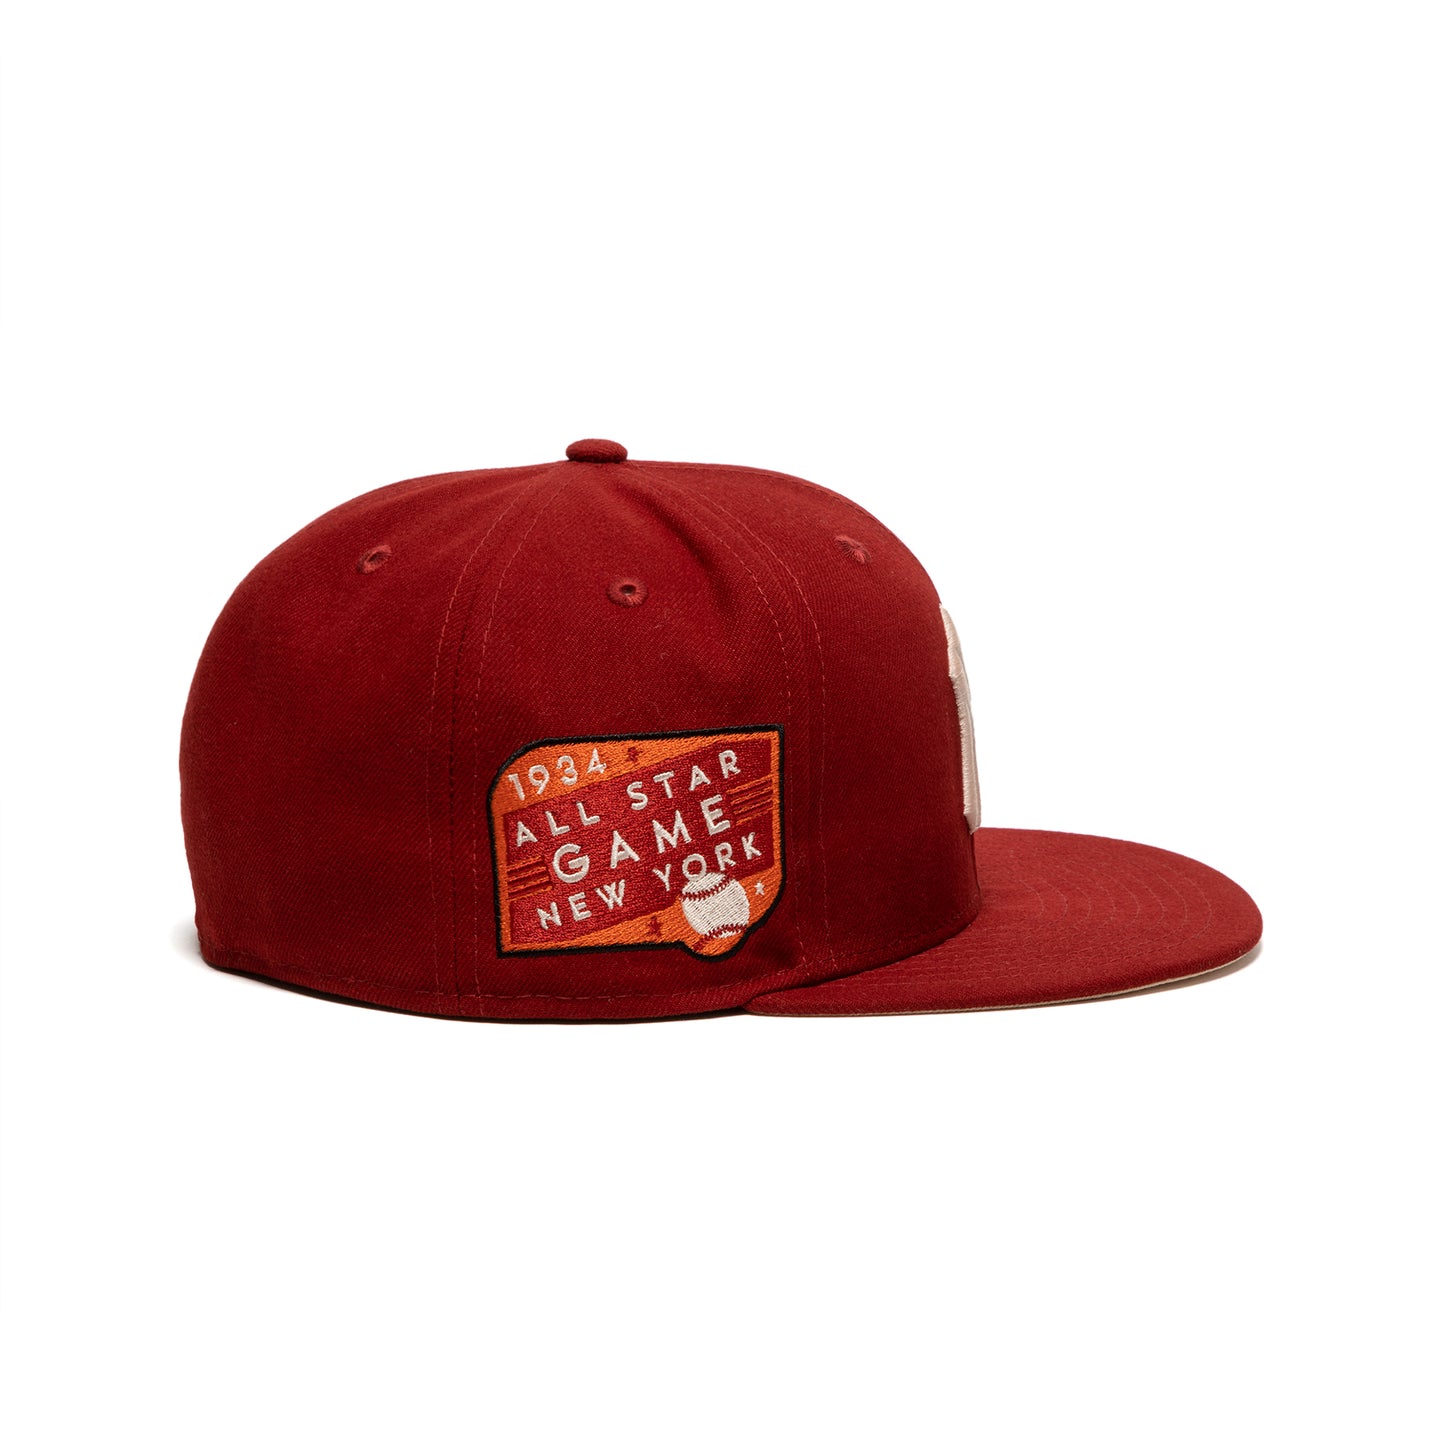 Concepts x New Era 59Fifty New York Yankees Fitted Hat (Red/Mango)